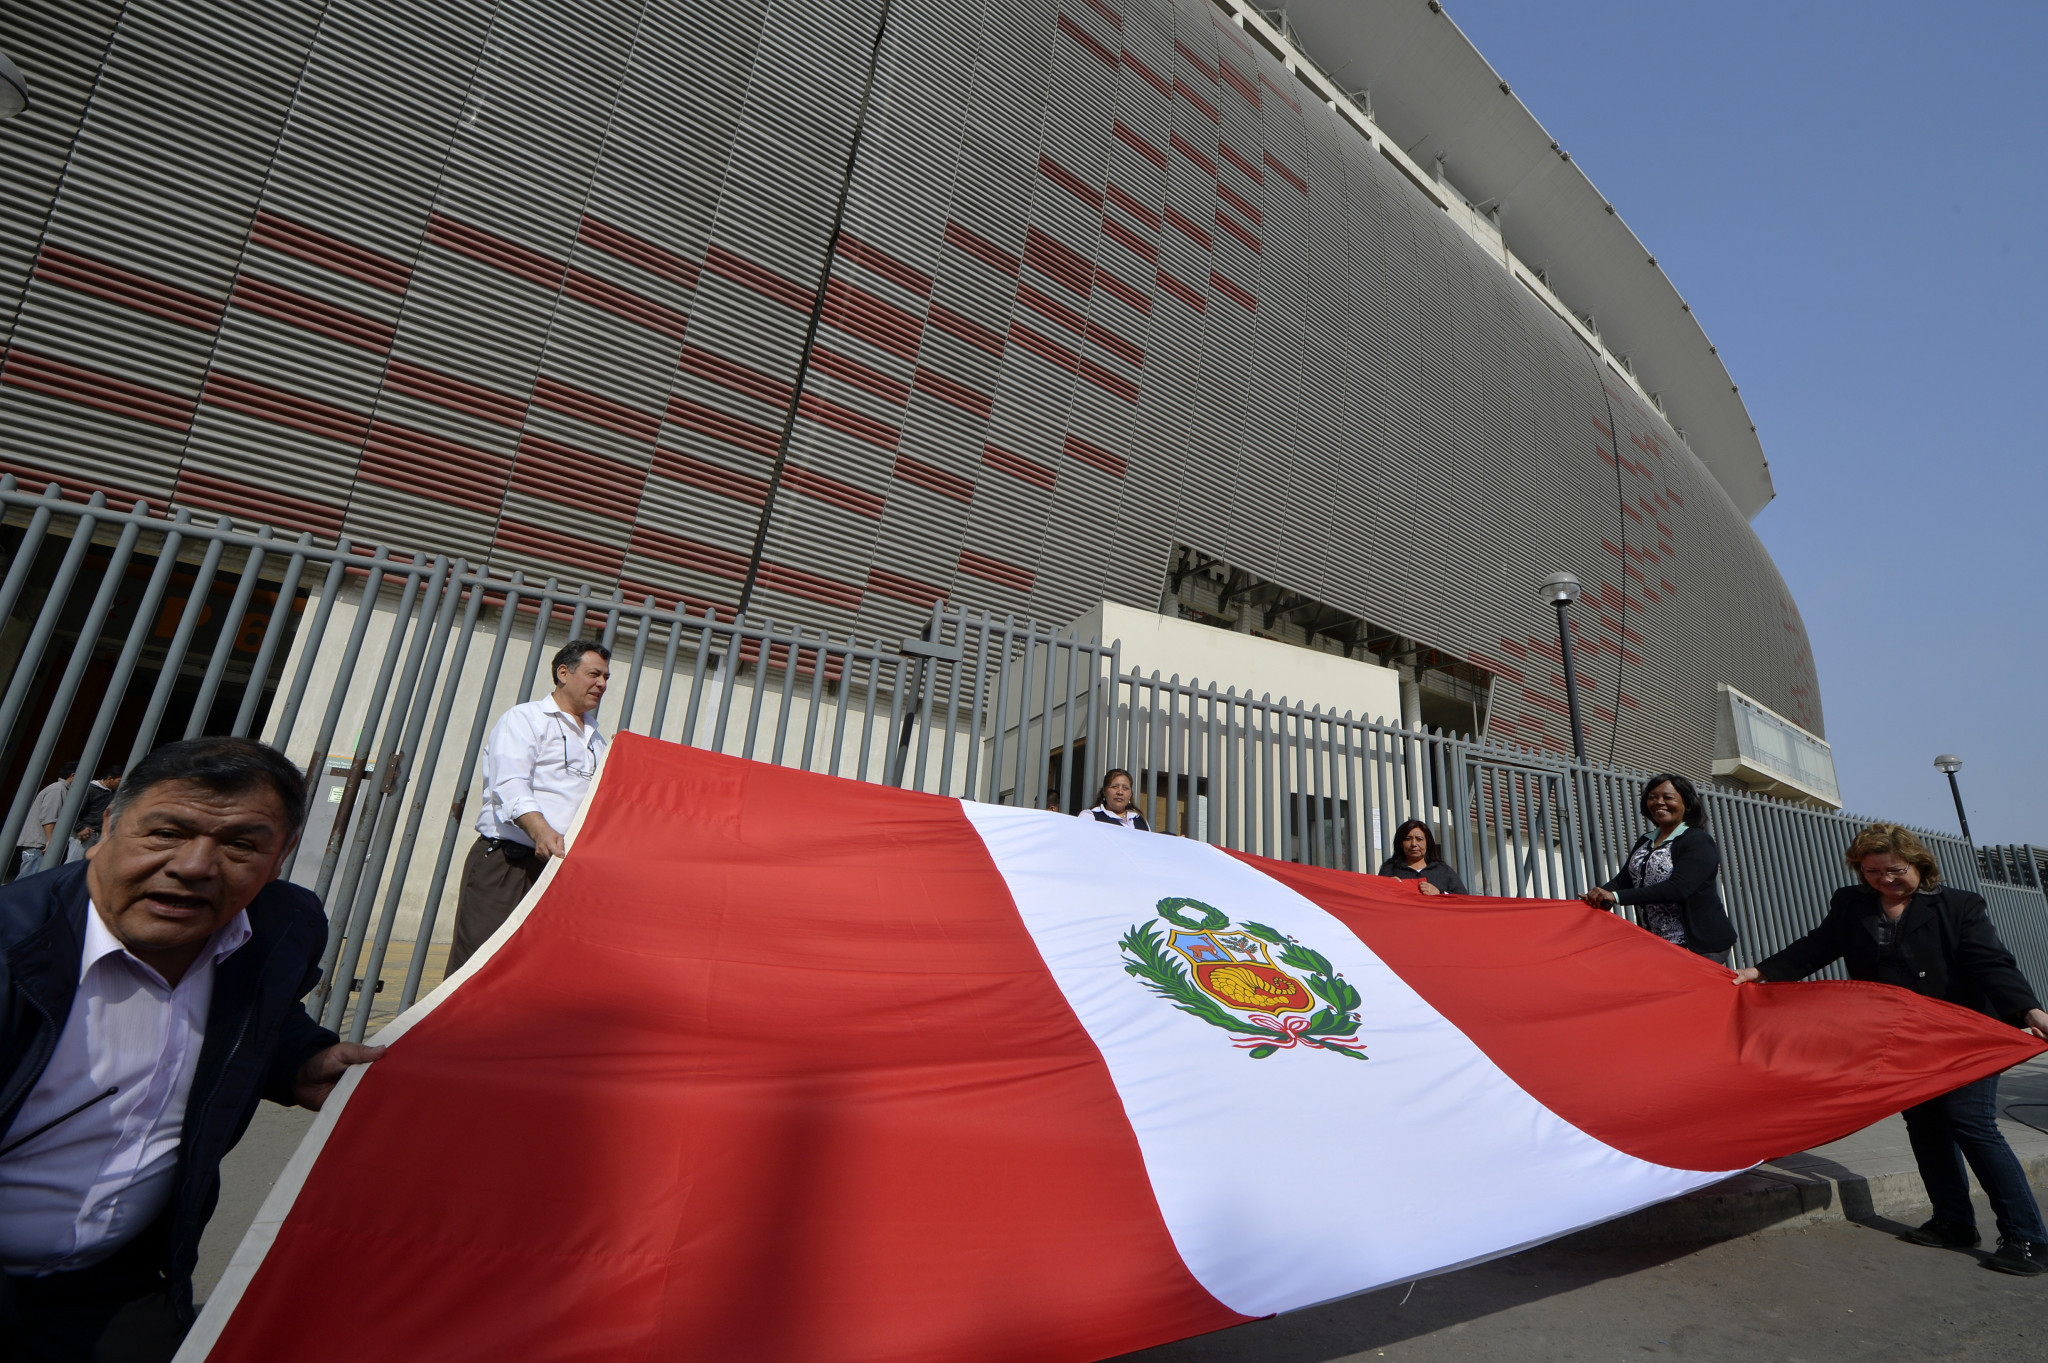 Peru is gearing up for the Pan American Games and Parapan American Games in Lima this year ©Getty Images